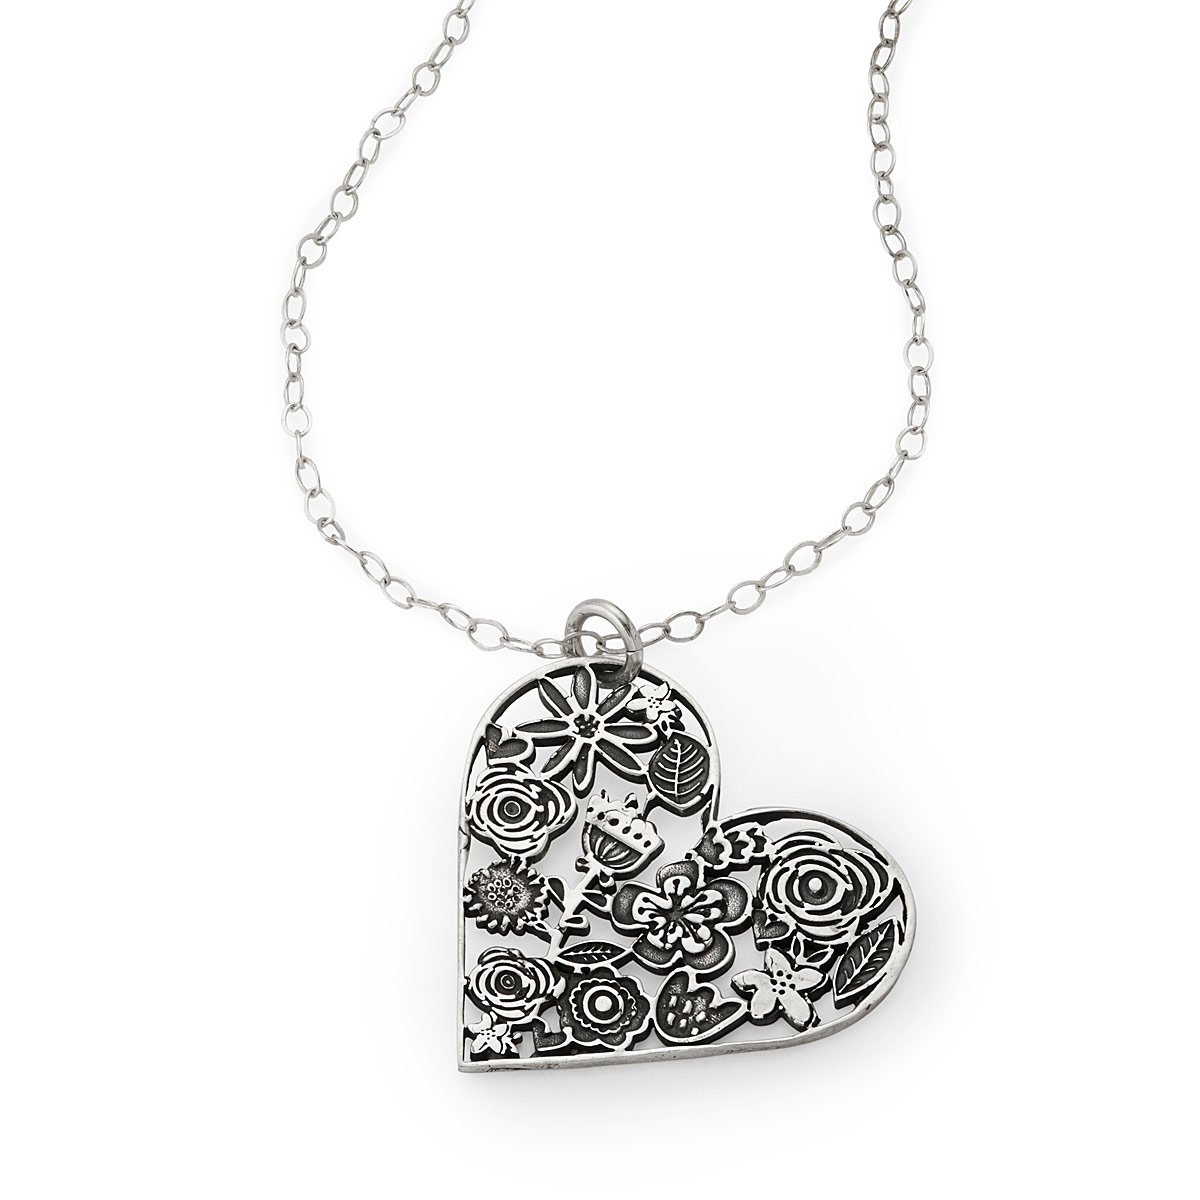 Floral Heart Cutout Necklace | Heart Necklace, Sterling Silver ...